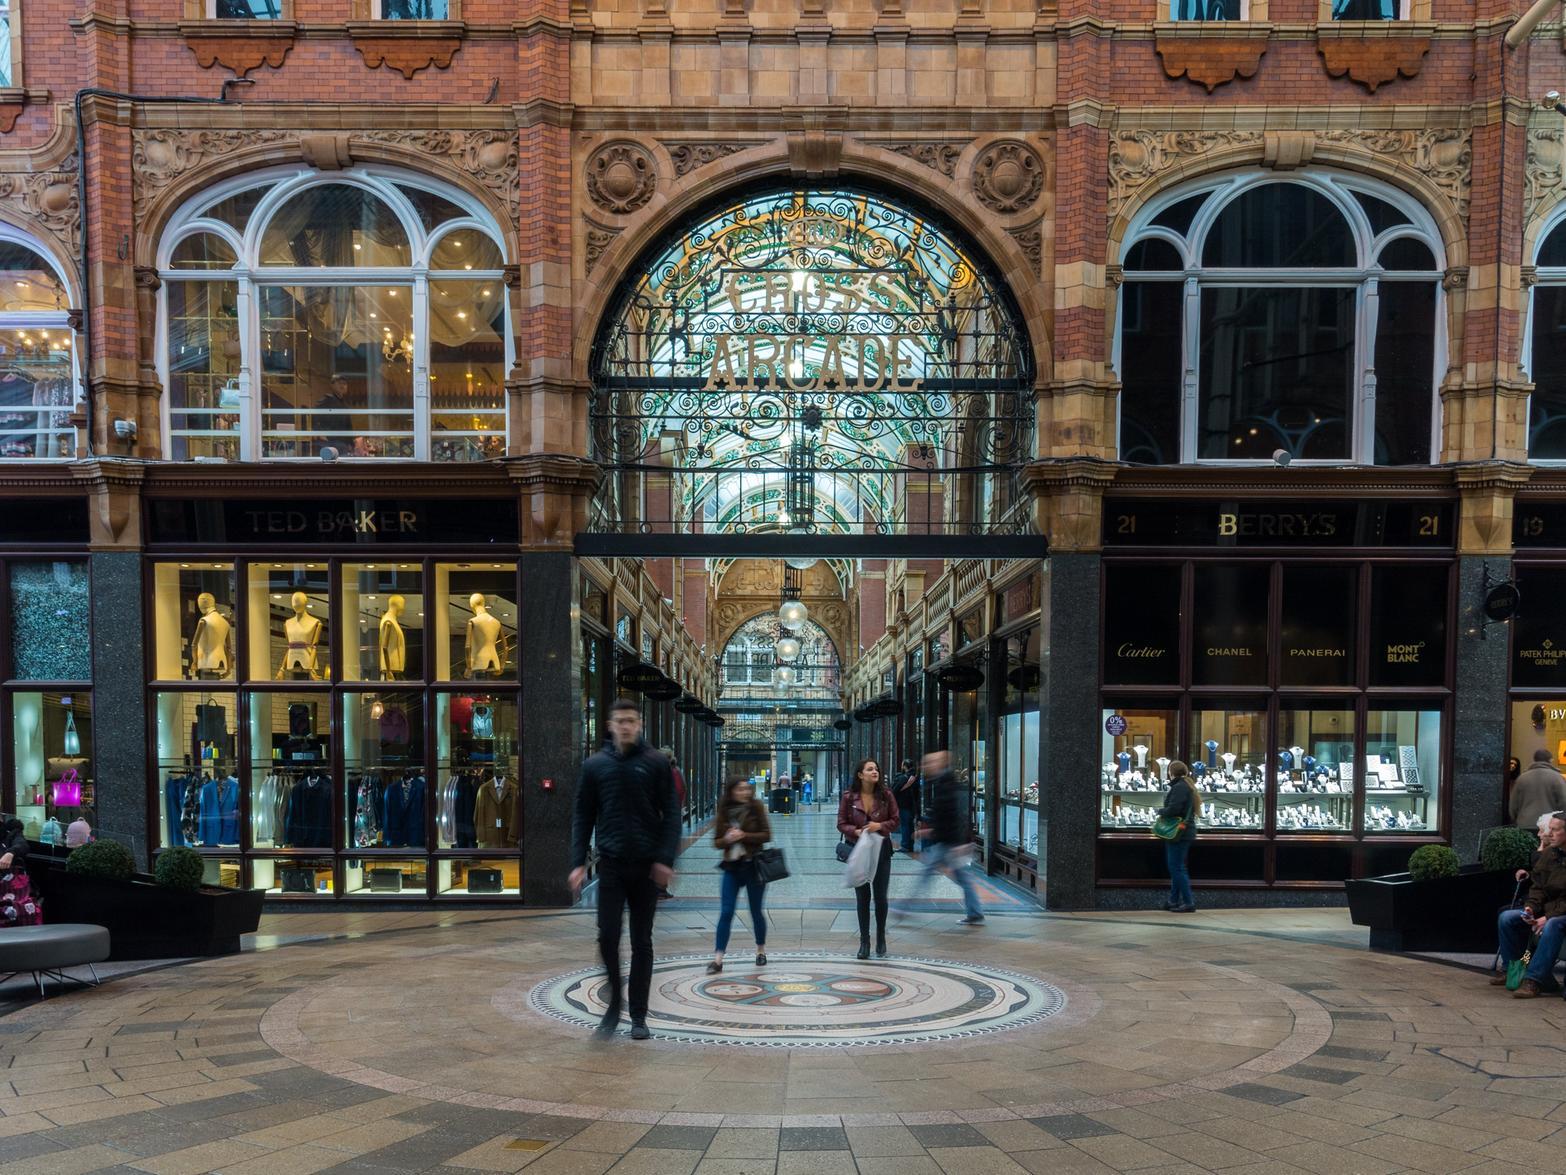 Restored from Victorian shopping arcades in 1990, Victoria Quarter is now fully decked-out for Christmas. It's full of big brand names and independent boutiques - but with its prime city centre location, expect big crowds.